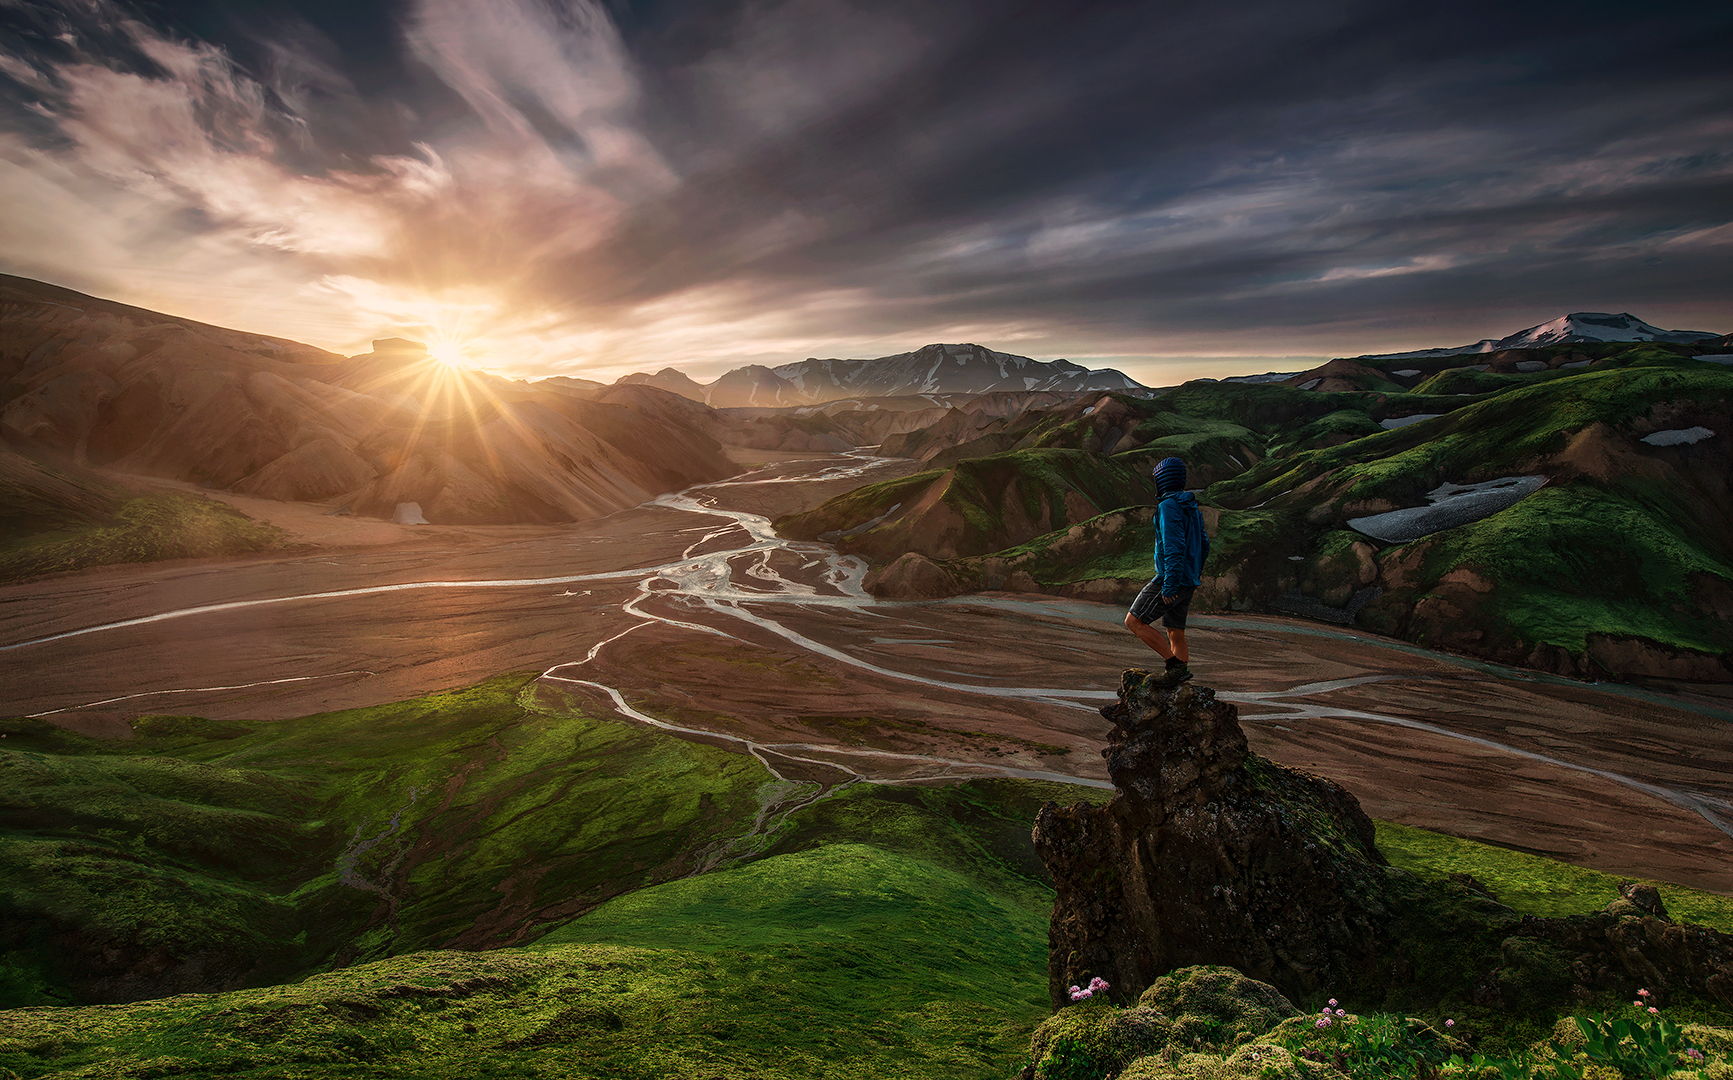 45 Scenic Self-Portraits That Will Take You Places